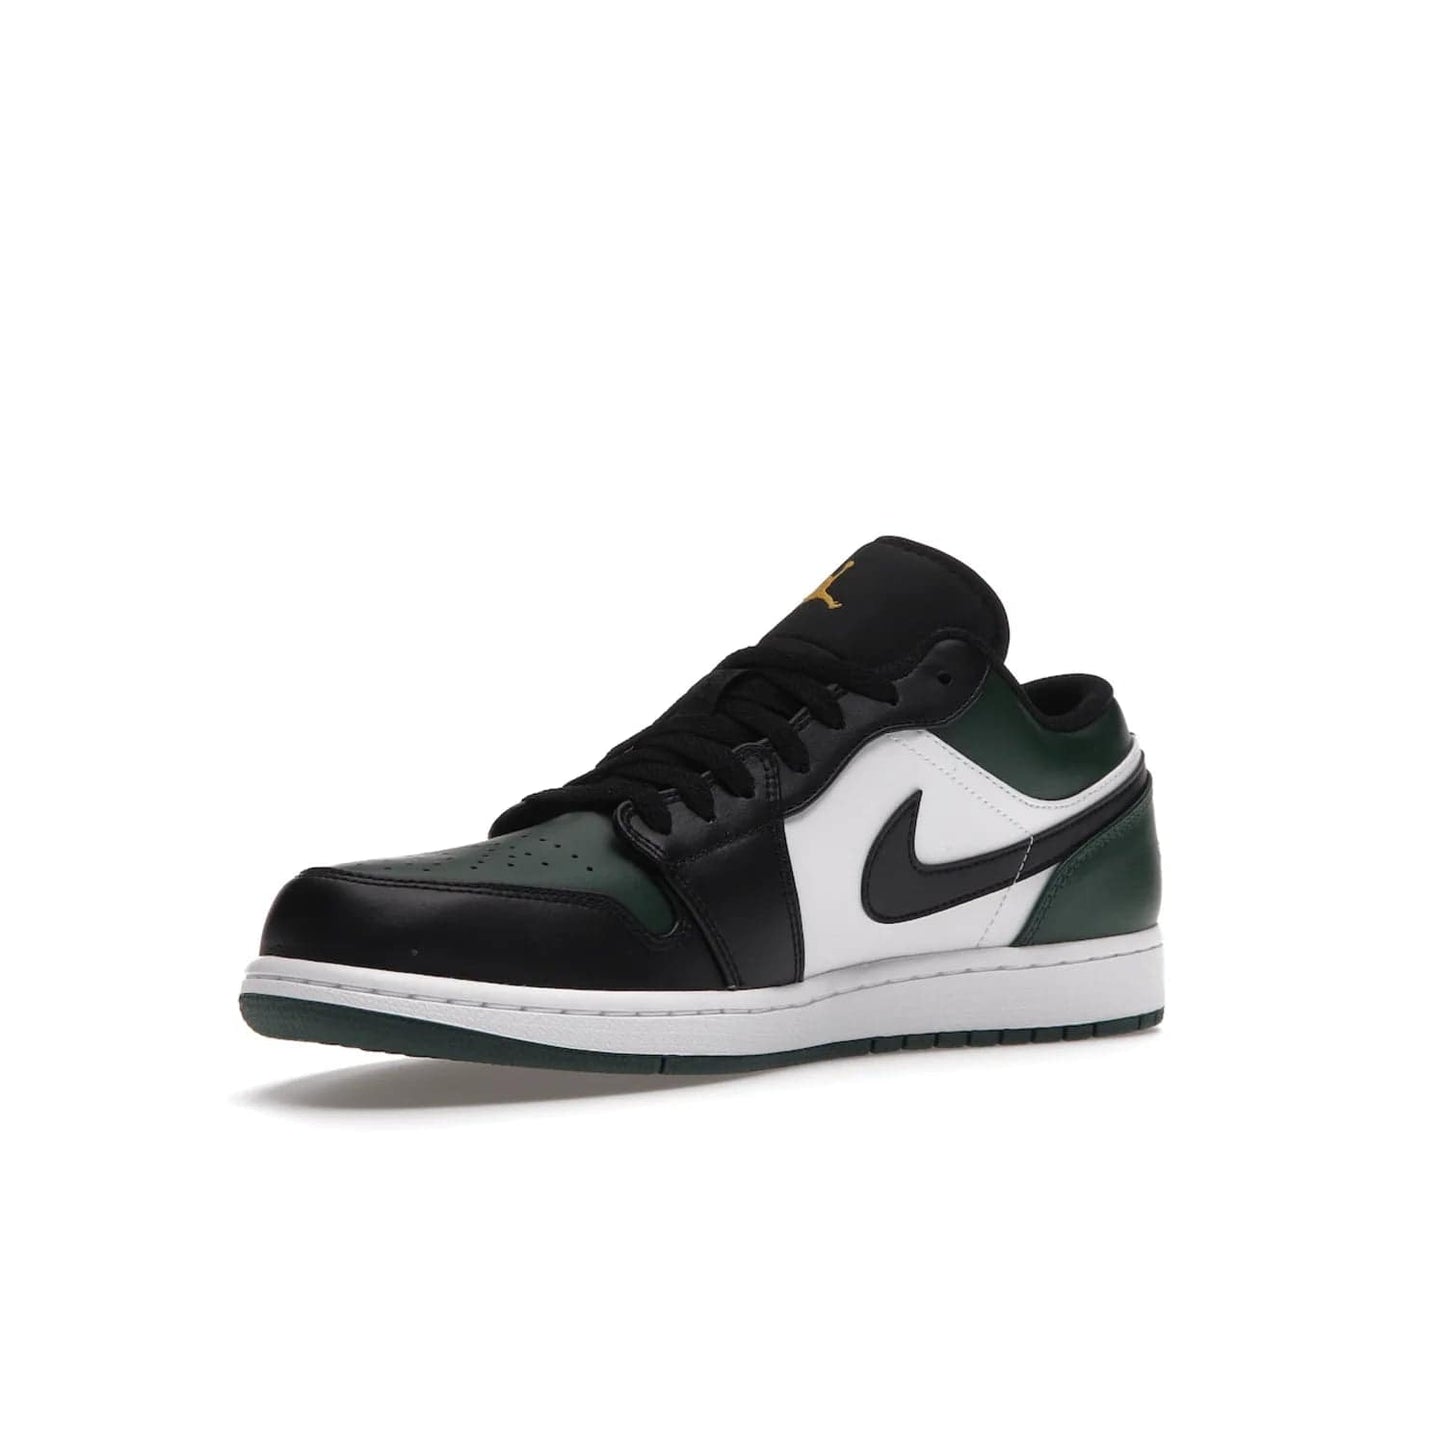 Jordan 1 Low Green Toe - Image 15 - Only at www.BallersClubKickz.com - The Jordan 1 Low Green Toe features white, black and Noble Green leather with black Swoosh. Get the classic Bred Toe-inspired color blocking with green perforated toe box. White and green Air sole completes the design. Released in October 2021 at only $100. Grab your pair now!